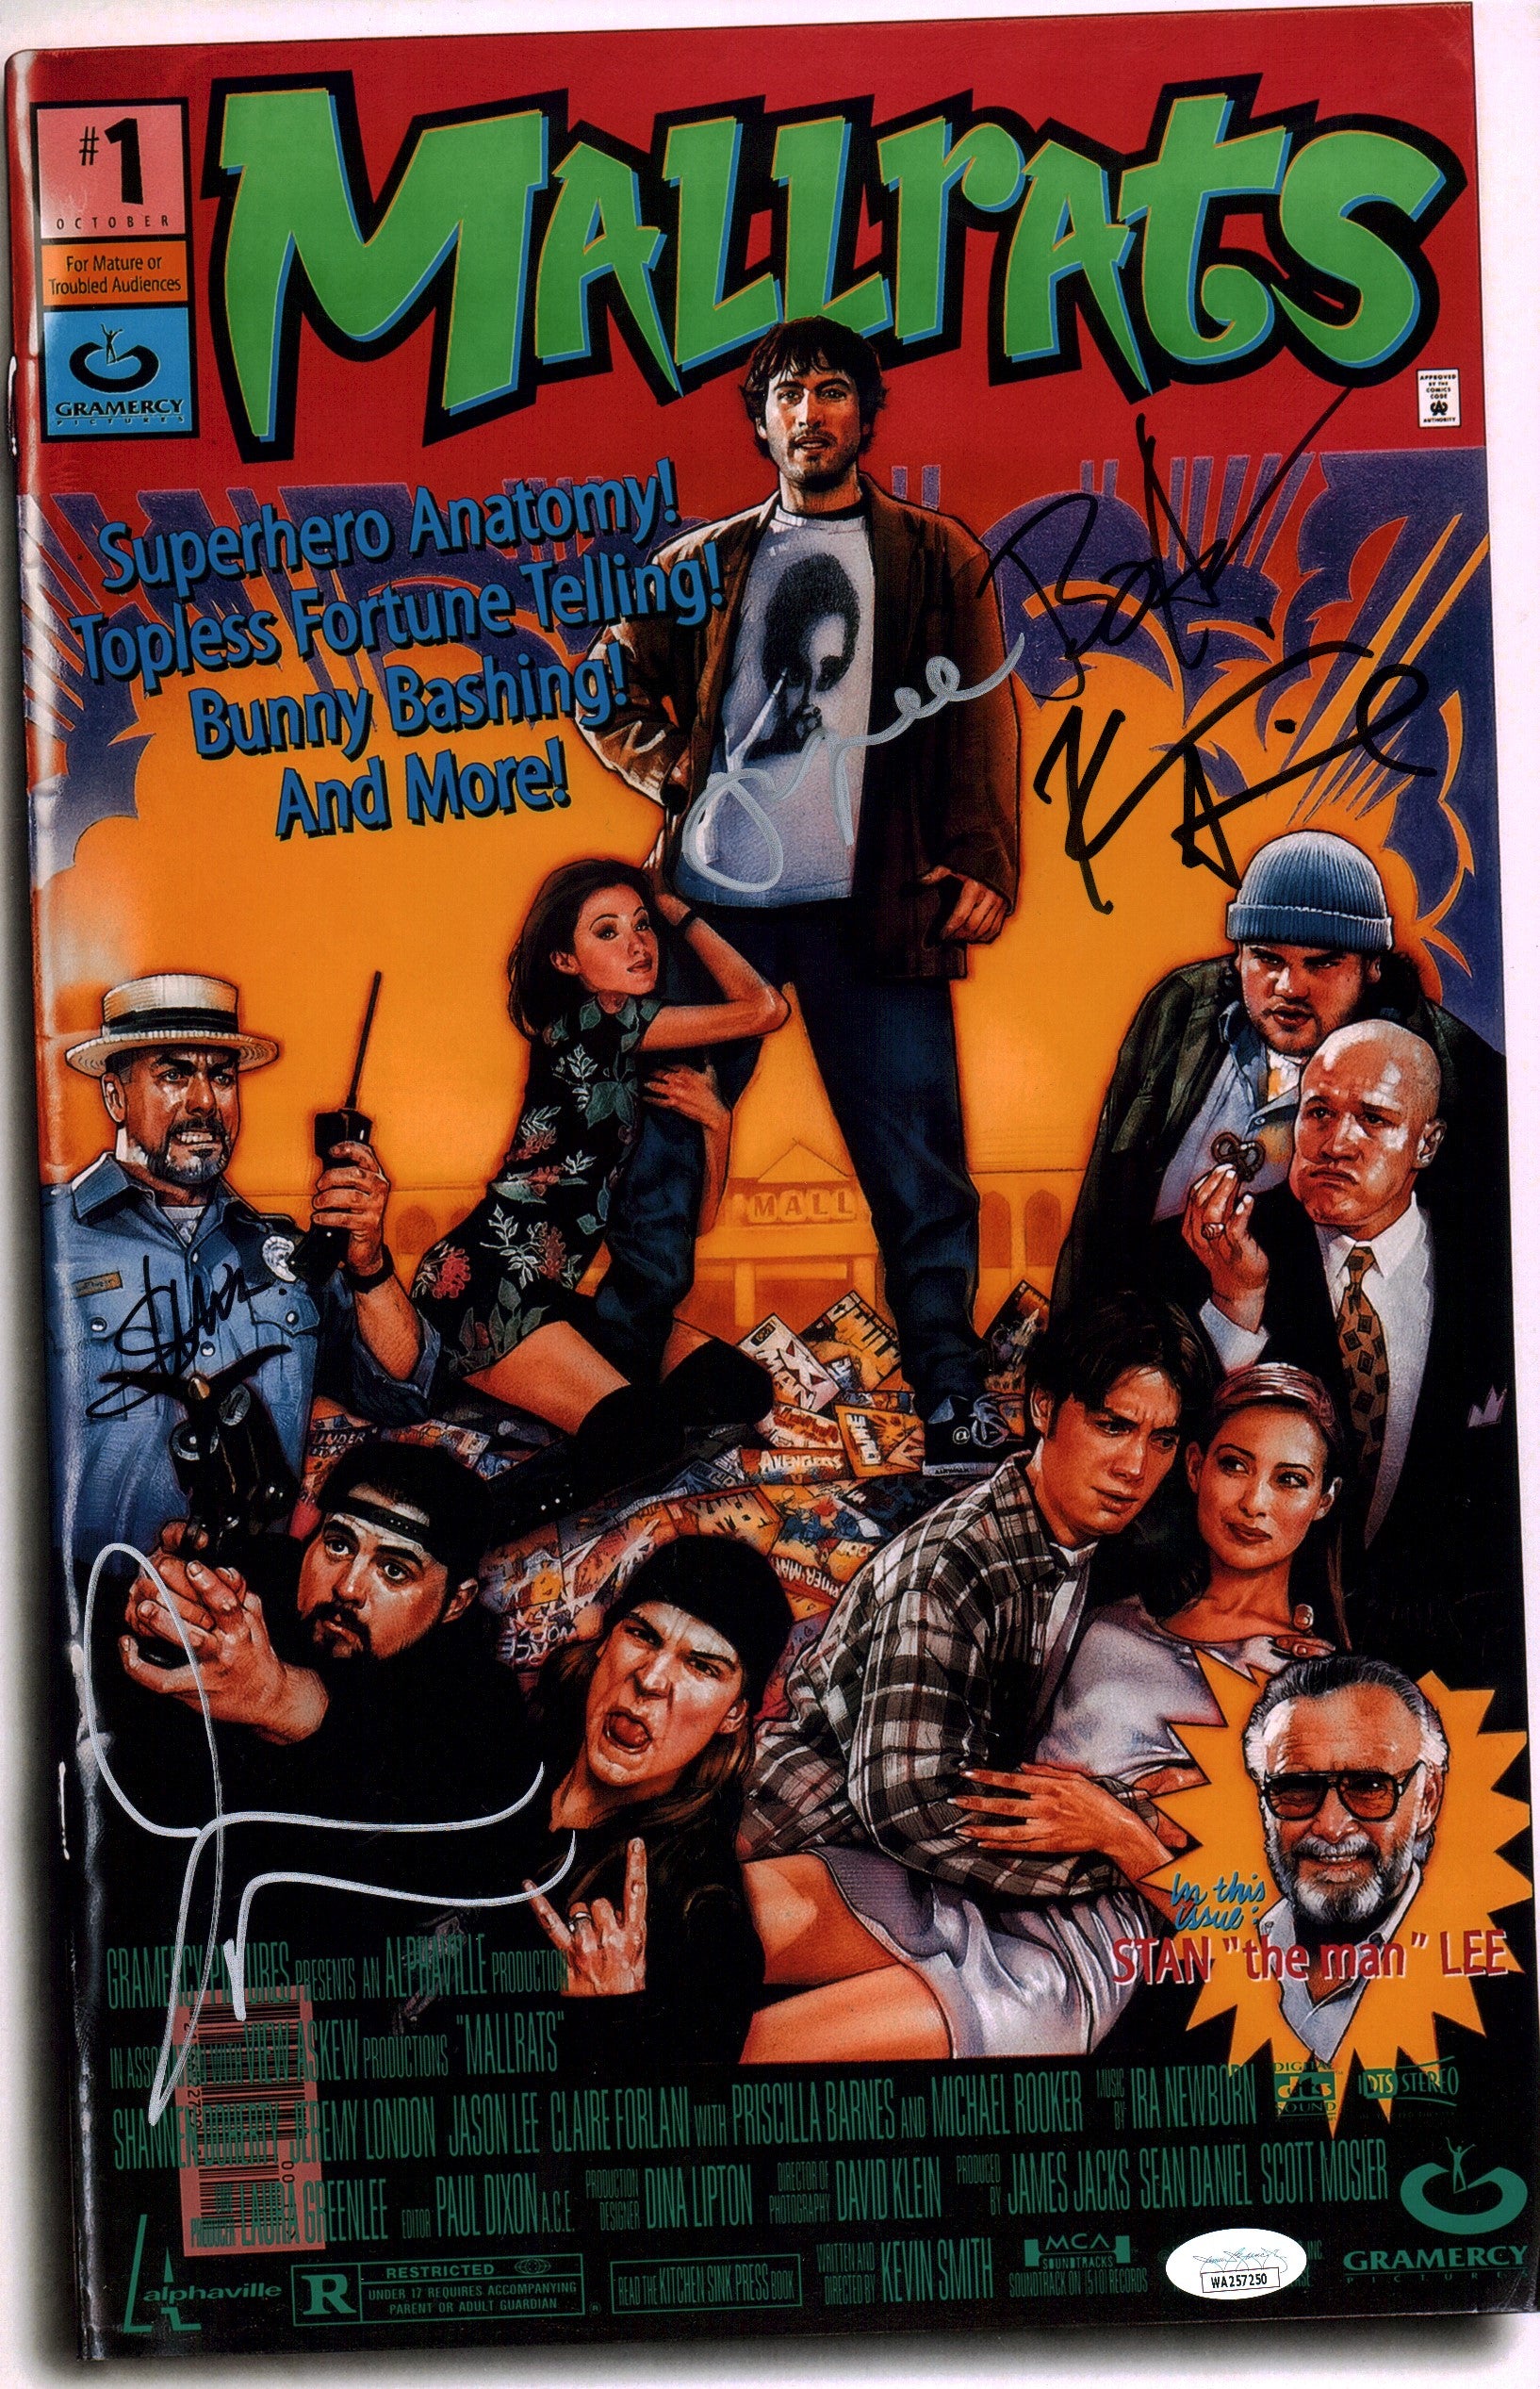 Mallrats 11x17 Signed Photo Poster Cast x5 Lee Mewes O'Halloran Smith Thorson JSA Certified Autograph